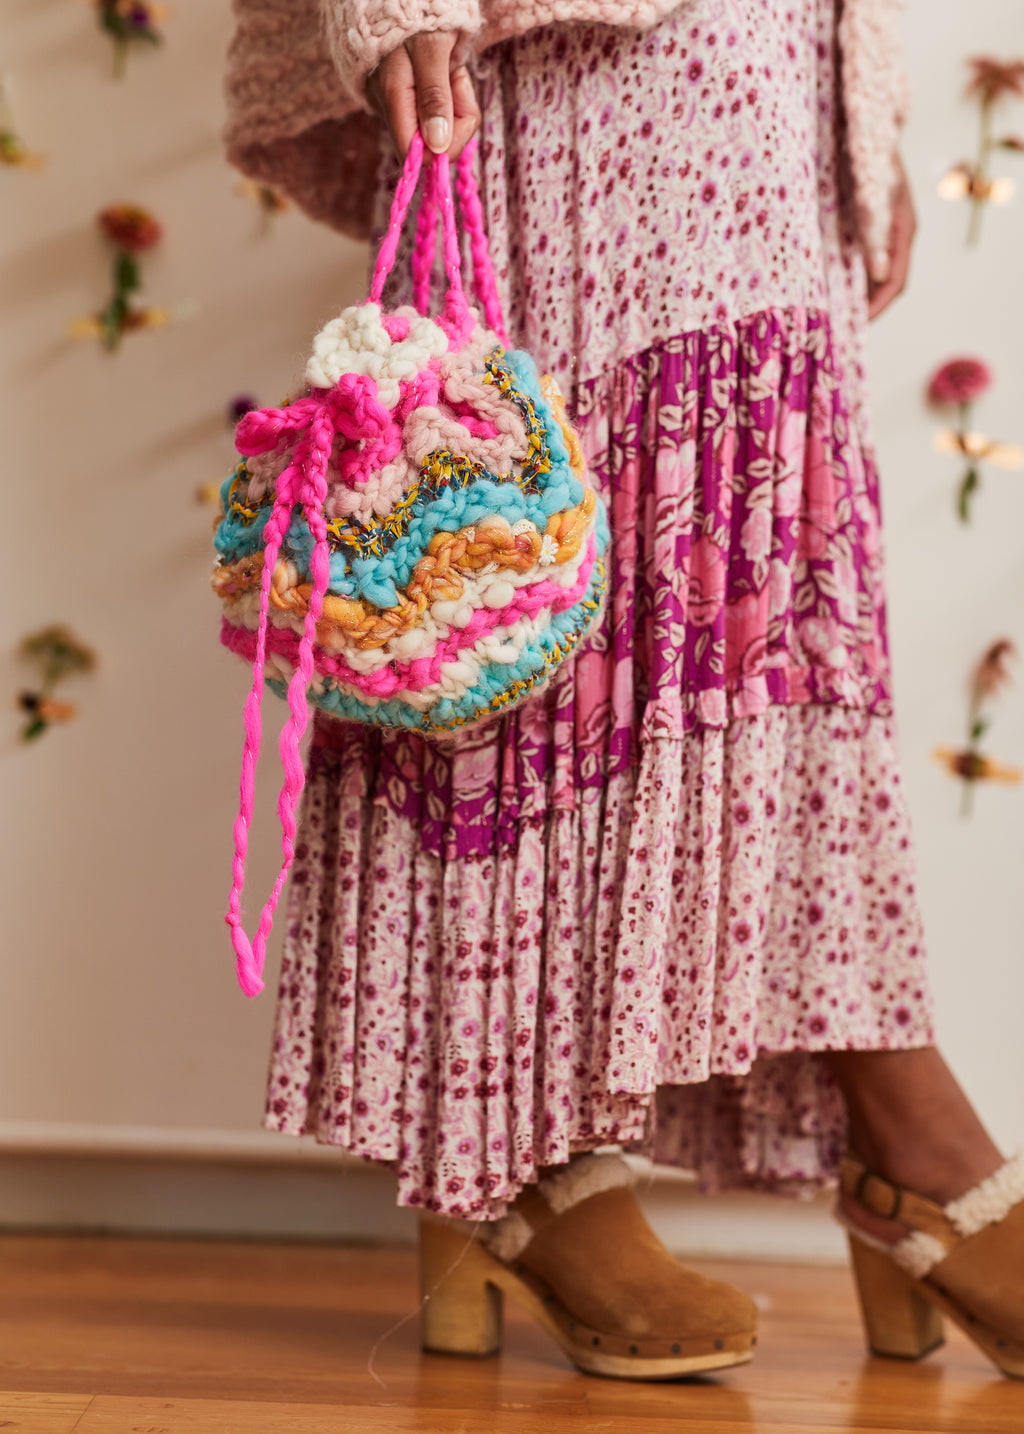 The handknit wool Sunshine sack is small enough to carry around everywhere